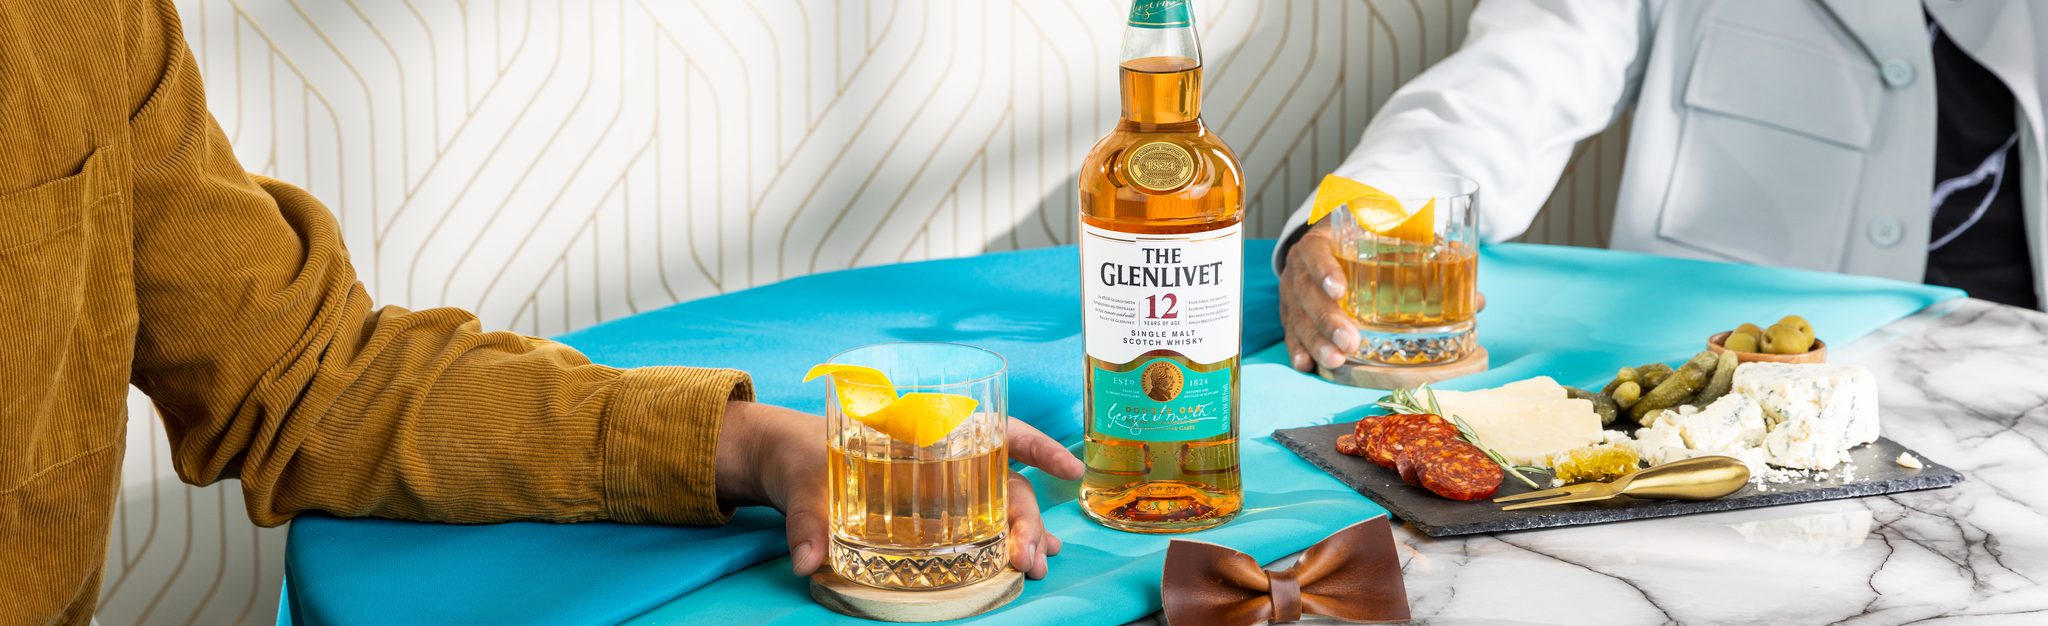 Old Fashioned Cocktail Recipe: Scotch Whisky - The Glenlivet